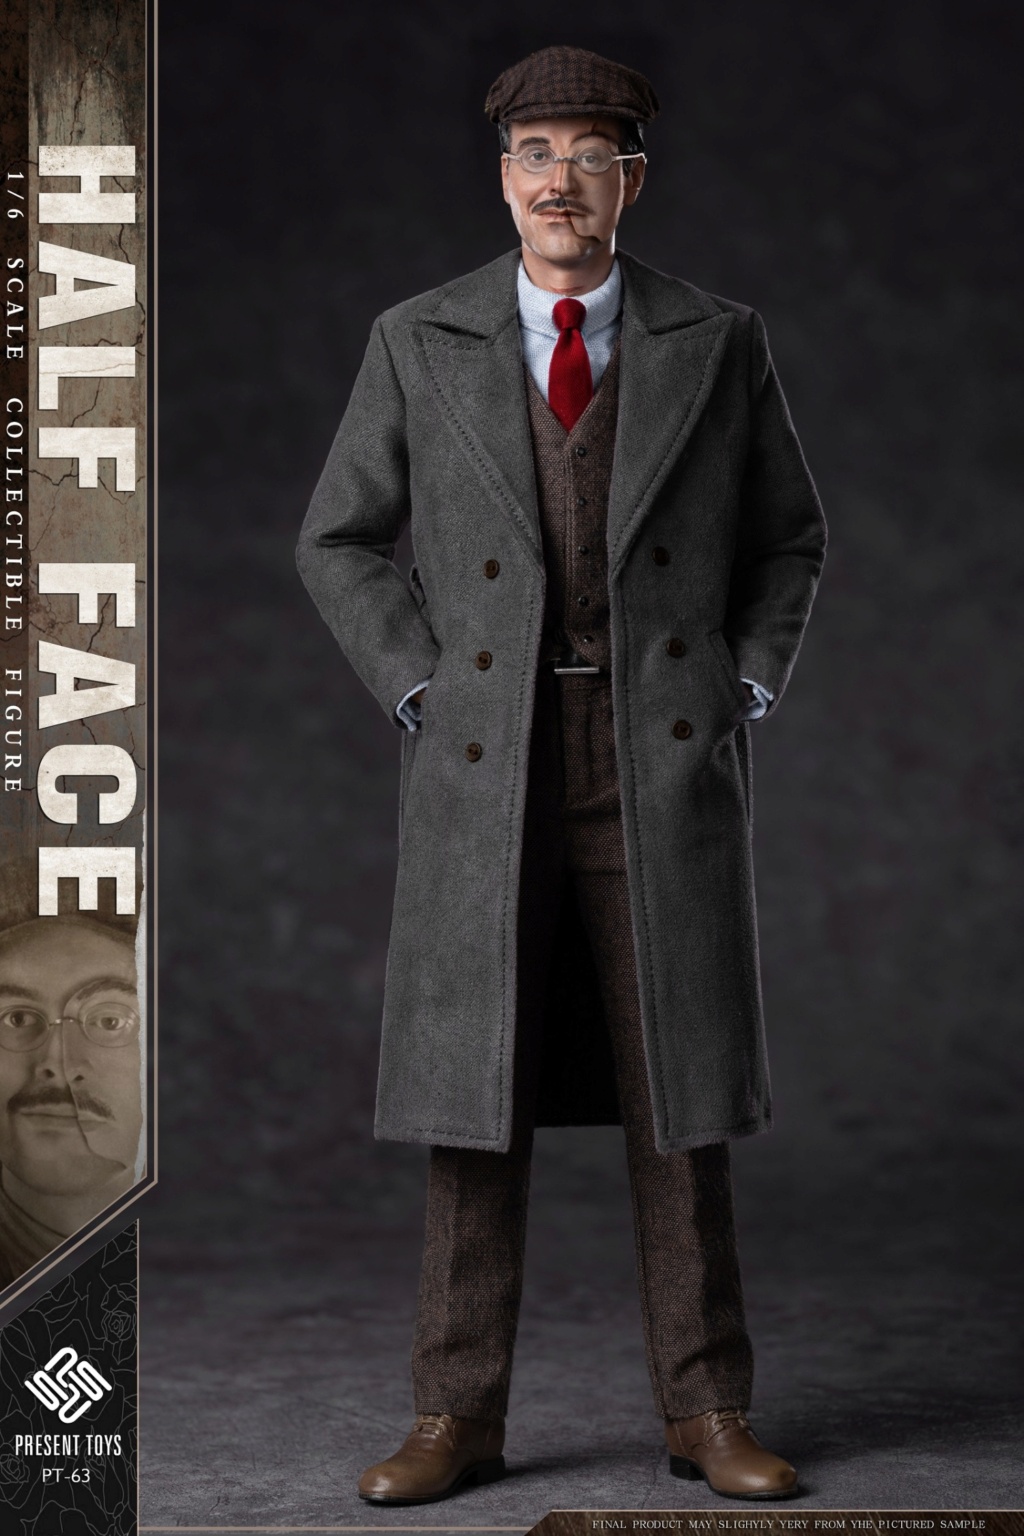 NEW PRODUCT: PRESENT TOYS  1:6 collectiblefigure – Half Face. 19270710